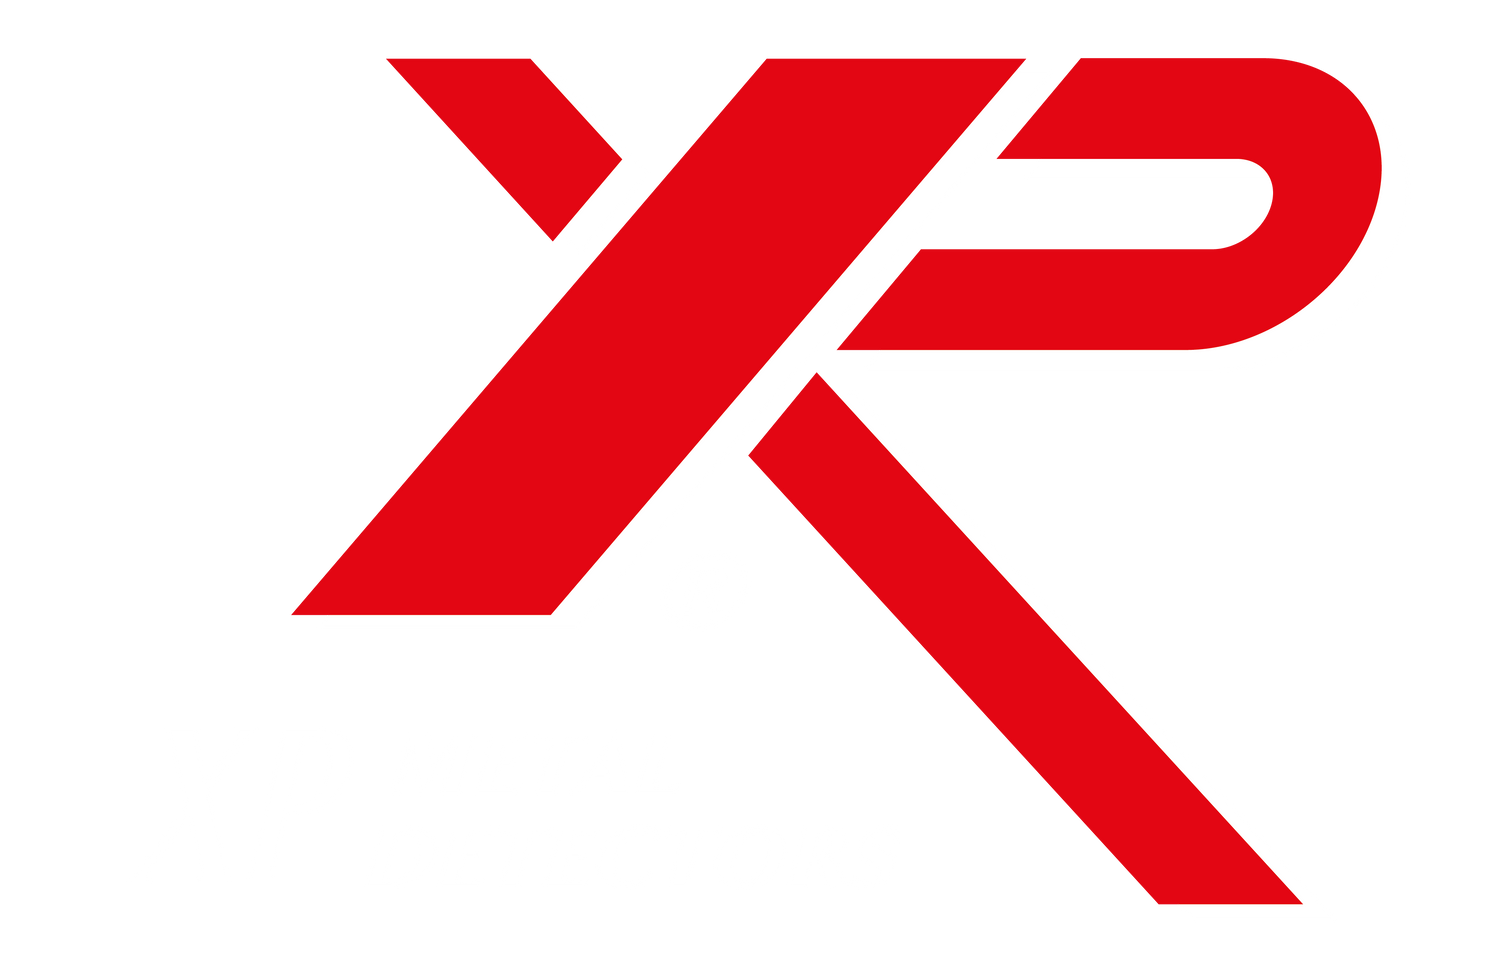 XP Genuine Parts and Accessories Aussie Detectorist Metal Detecting and Prospecting Supply.